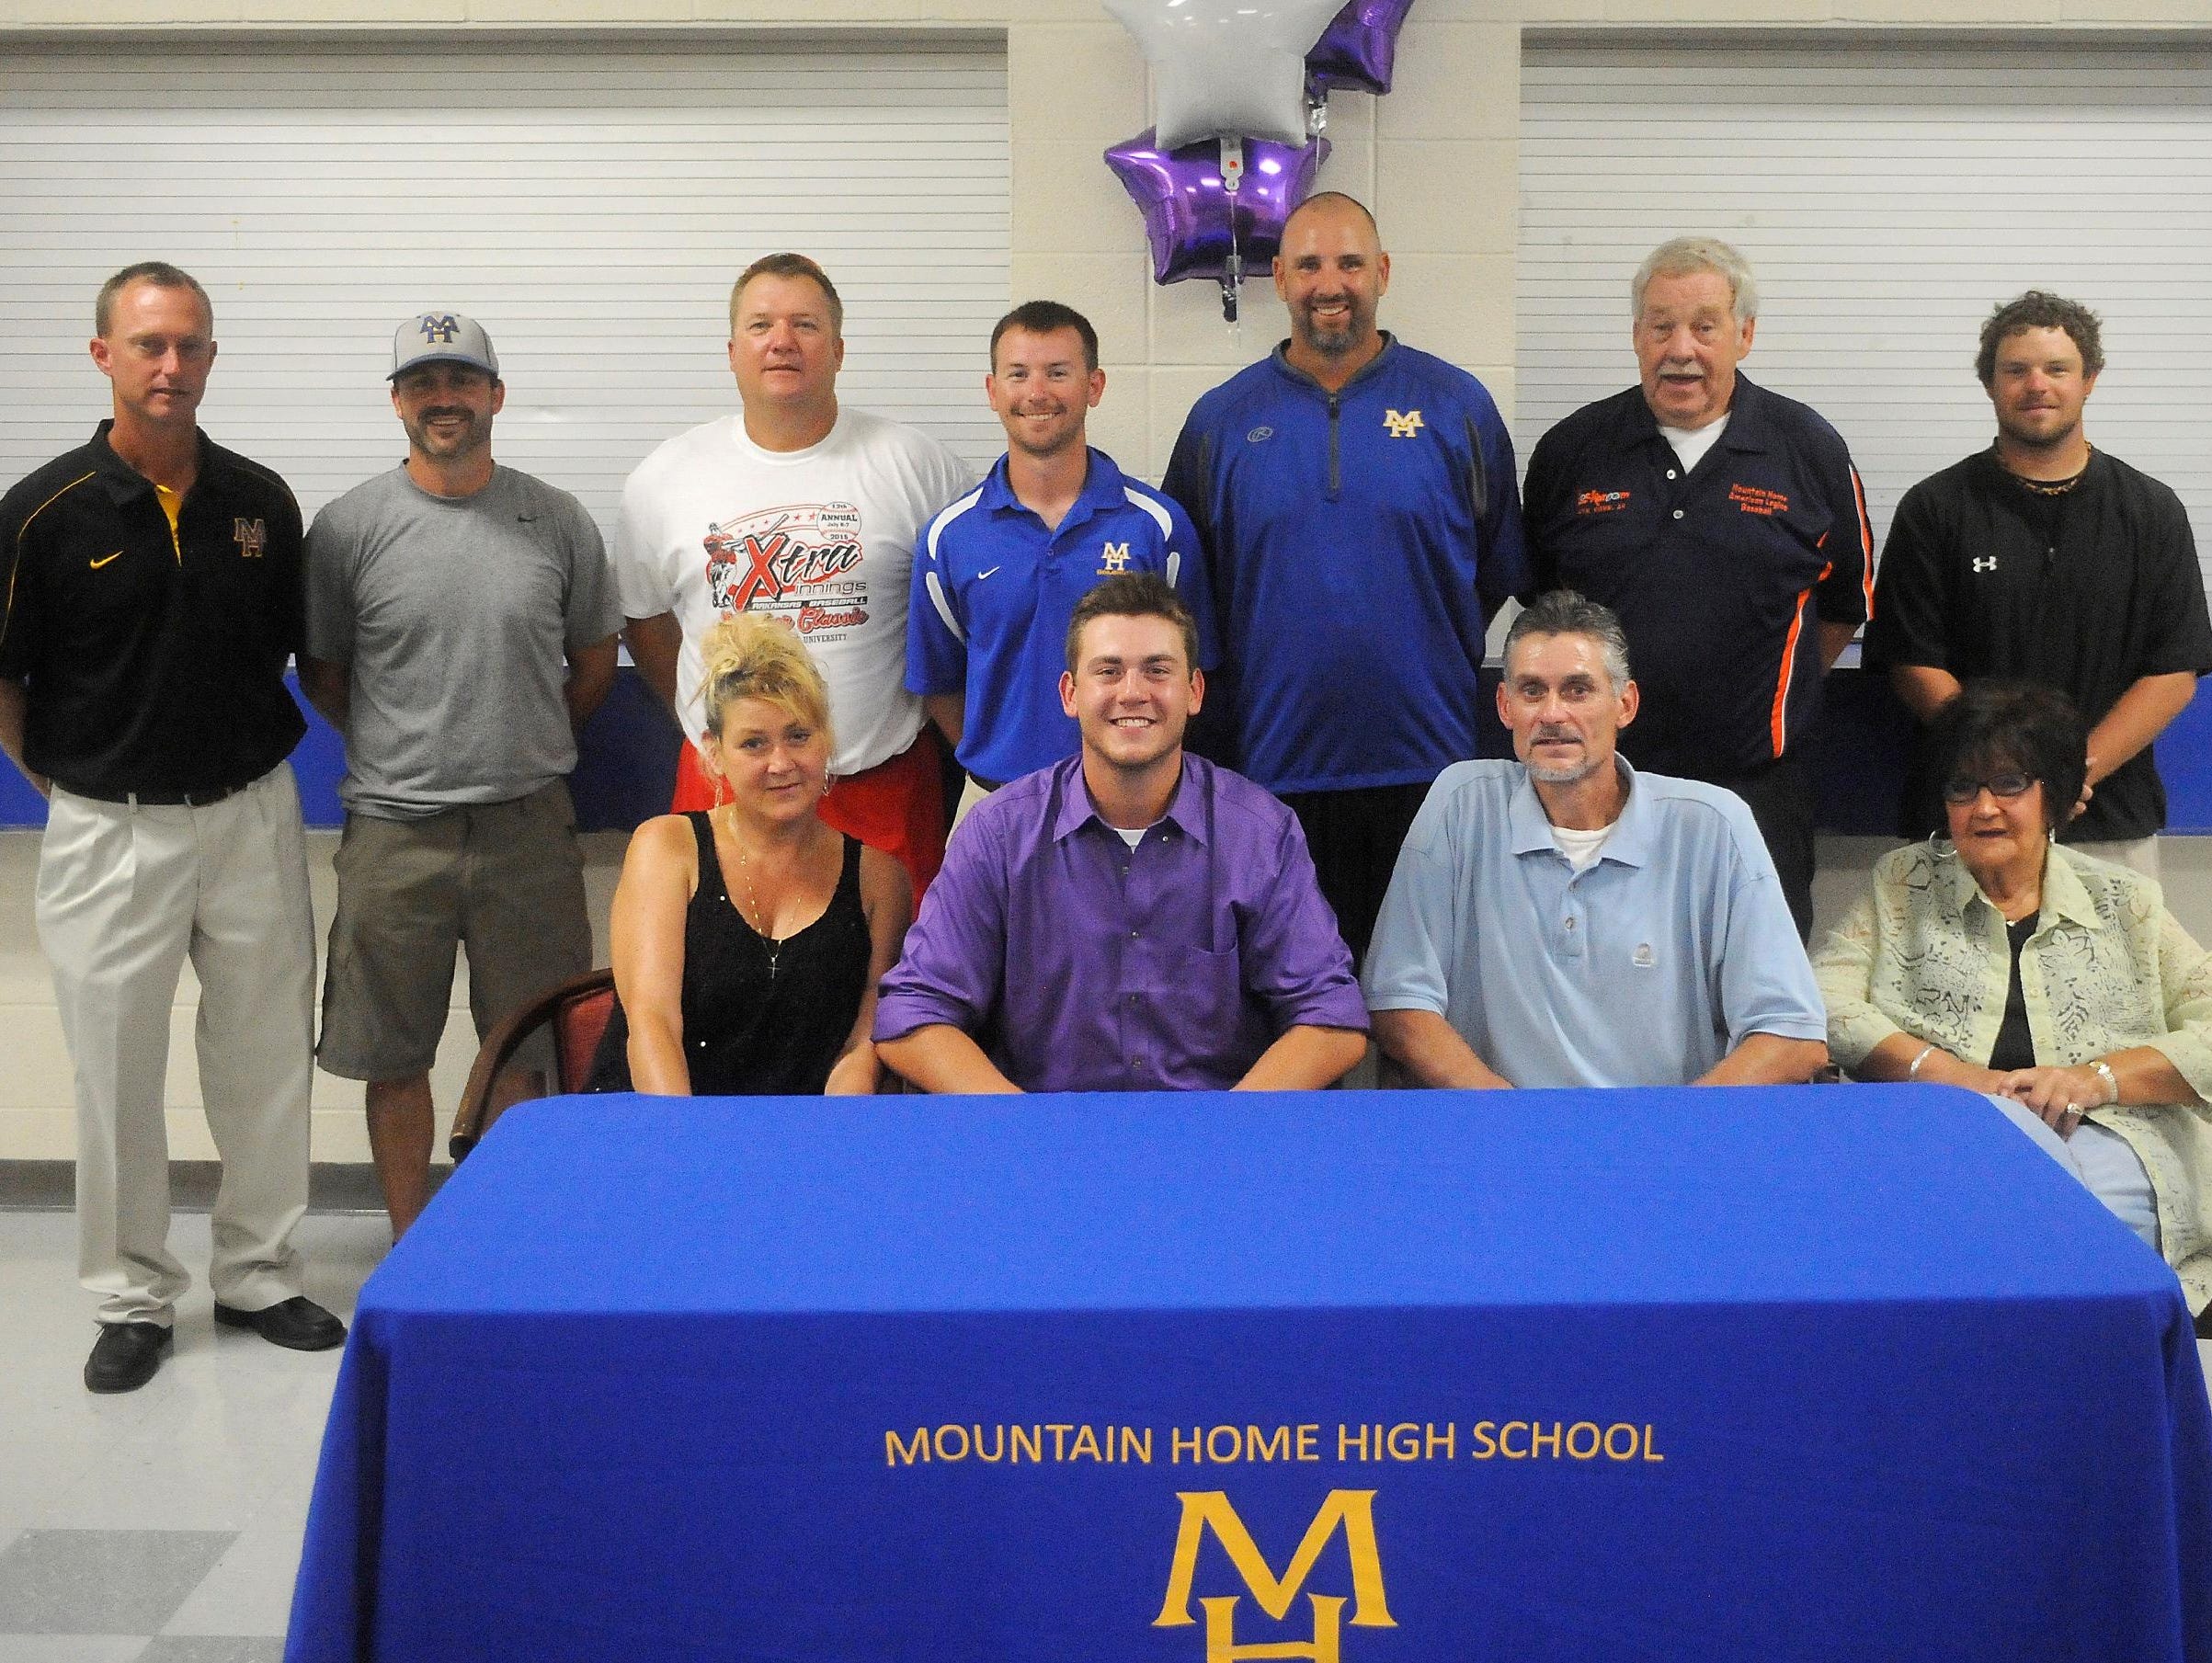 Mountain Home’s Sky-Lar Culver has signed a Division I National Letter of Intent to play baseball at the University of Central Arkansas in Conway. Shown at the signing ceremony on Wednesday are: first row, from left, mother, Kim Culver; Culver; father, Ron Culver; grandmother, Frieda Casteel; back row, Mountain Home athletic director Mitch Huskey; youth baseball coach Jason Hannaford; Lockeroom assistant coach Marty Ninemire; Mountain Home assistant coach Blake Hendricks; Mountain Home head coach Jim Tejcek; Lockeroom head coach Lester White; and Lockeroom assistant coach Clayton Gardner.